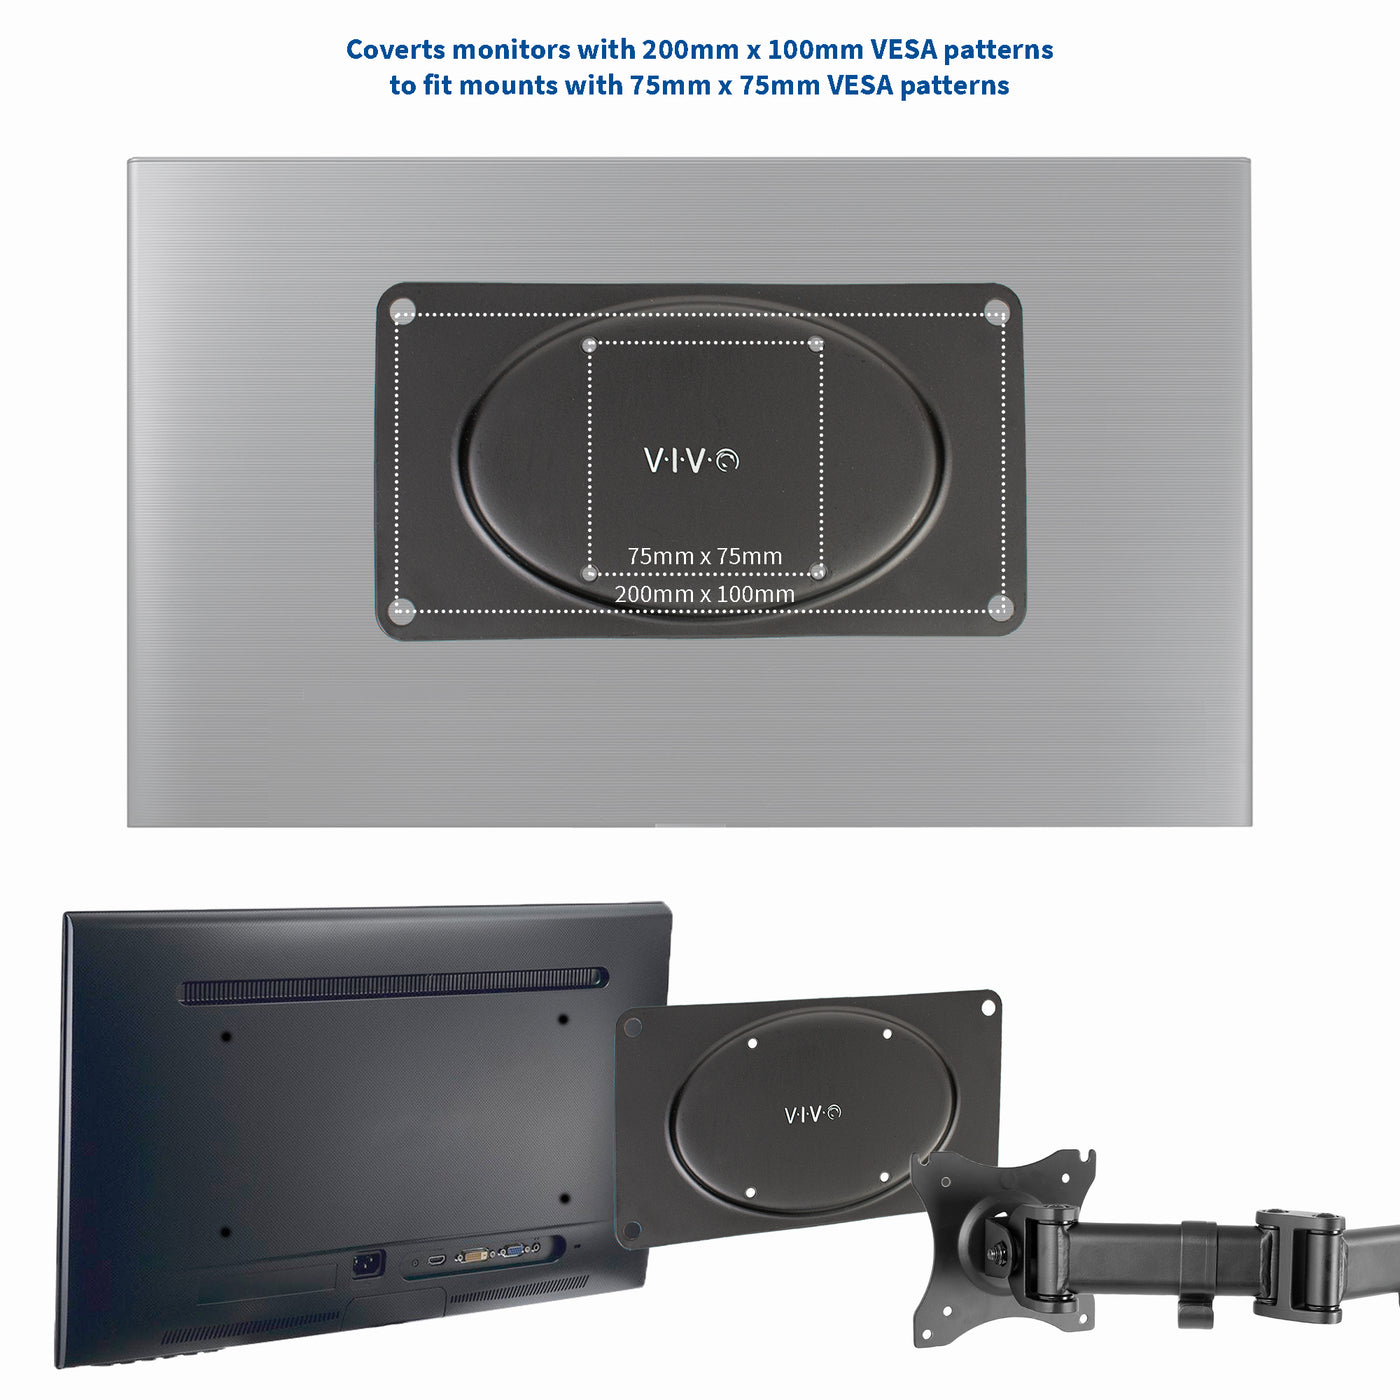 Plate adapting to standard monitor mount and large monitor frame providing efficient use of plate.